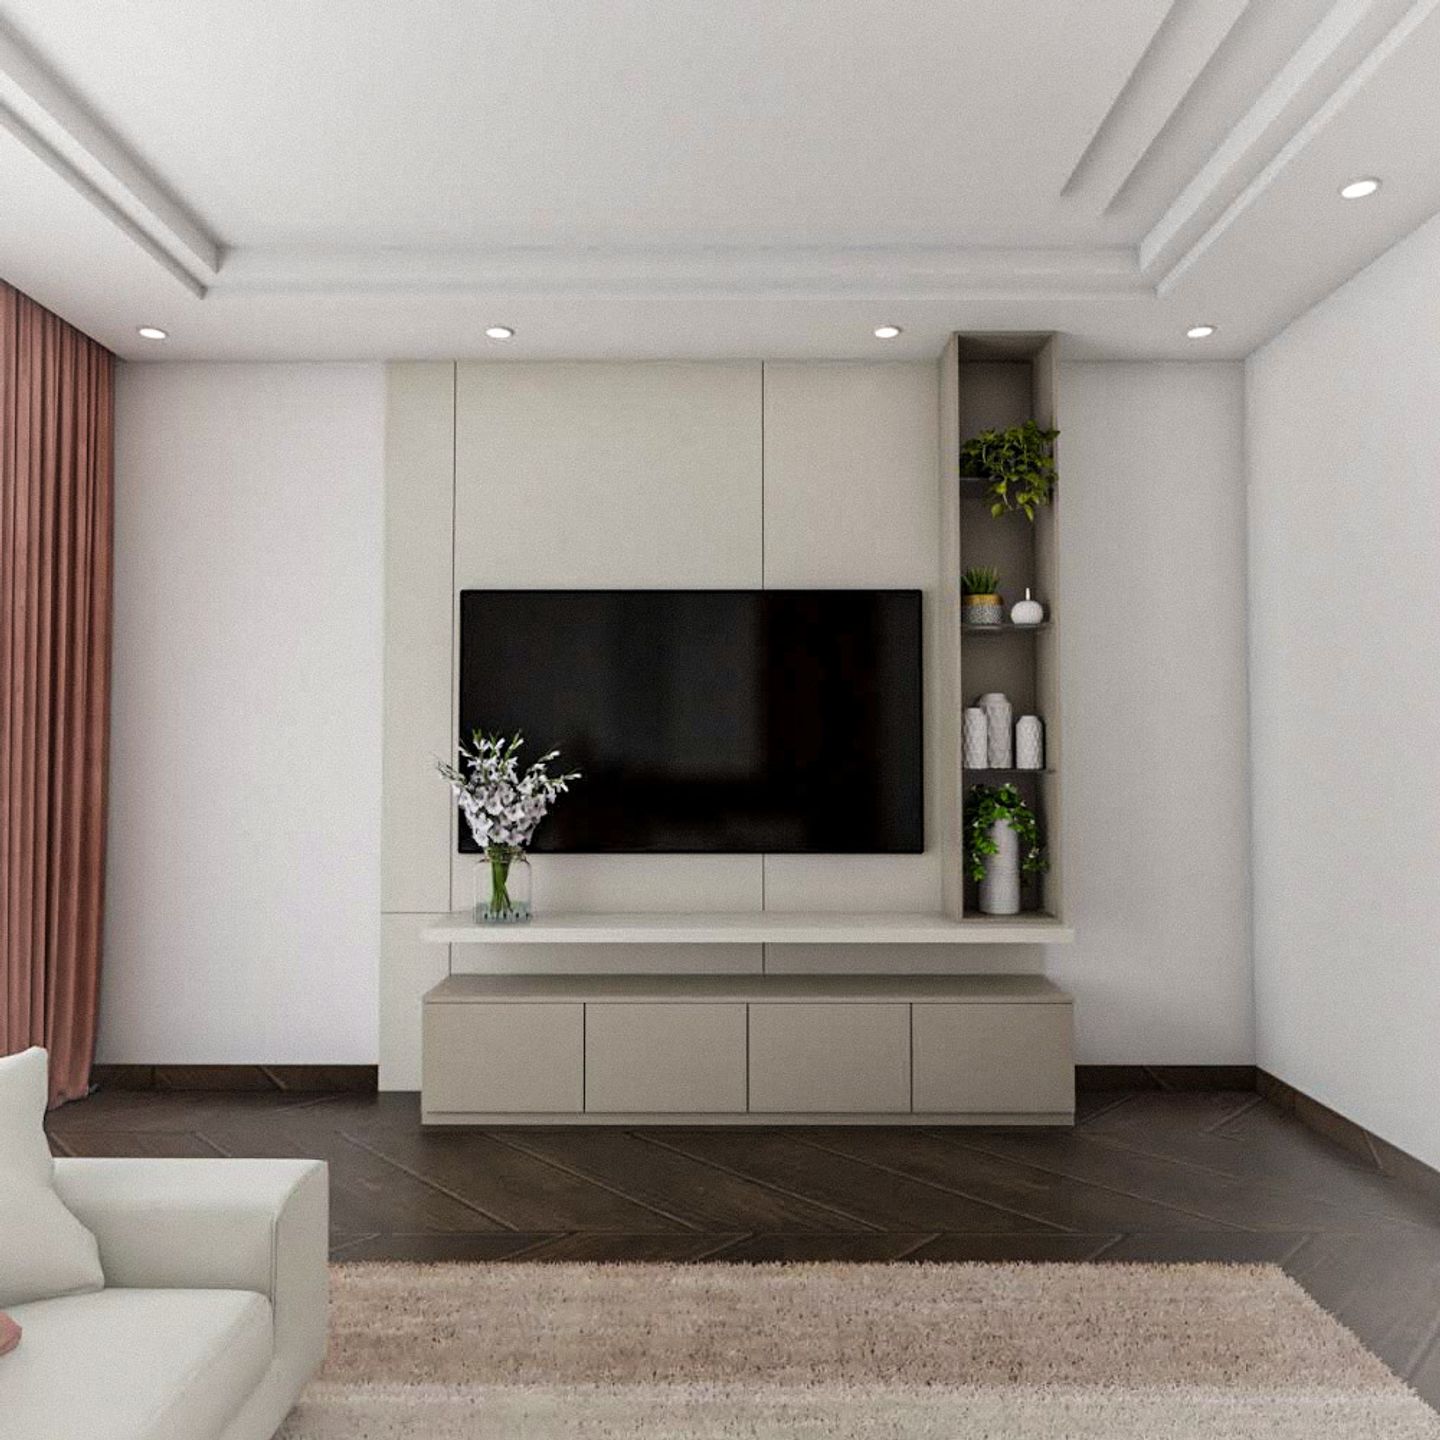 White And Beige TV Unit Design With Full-Length Back Panel - Livspace